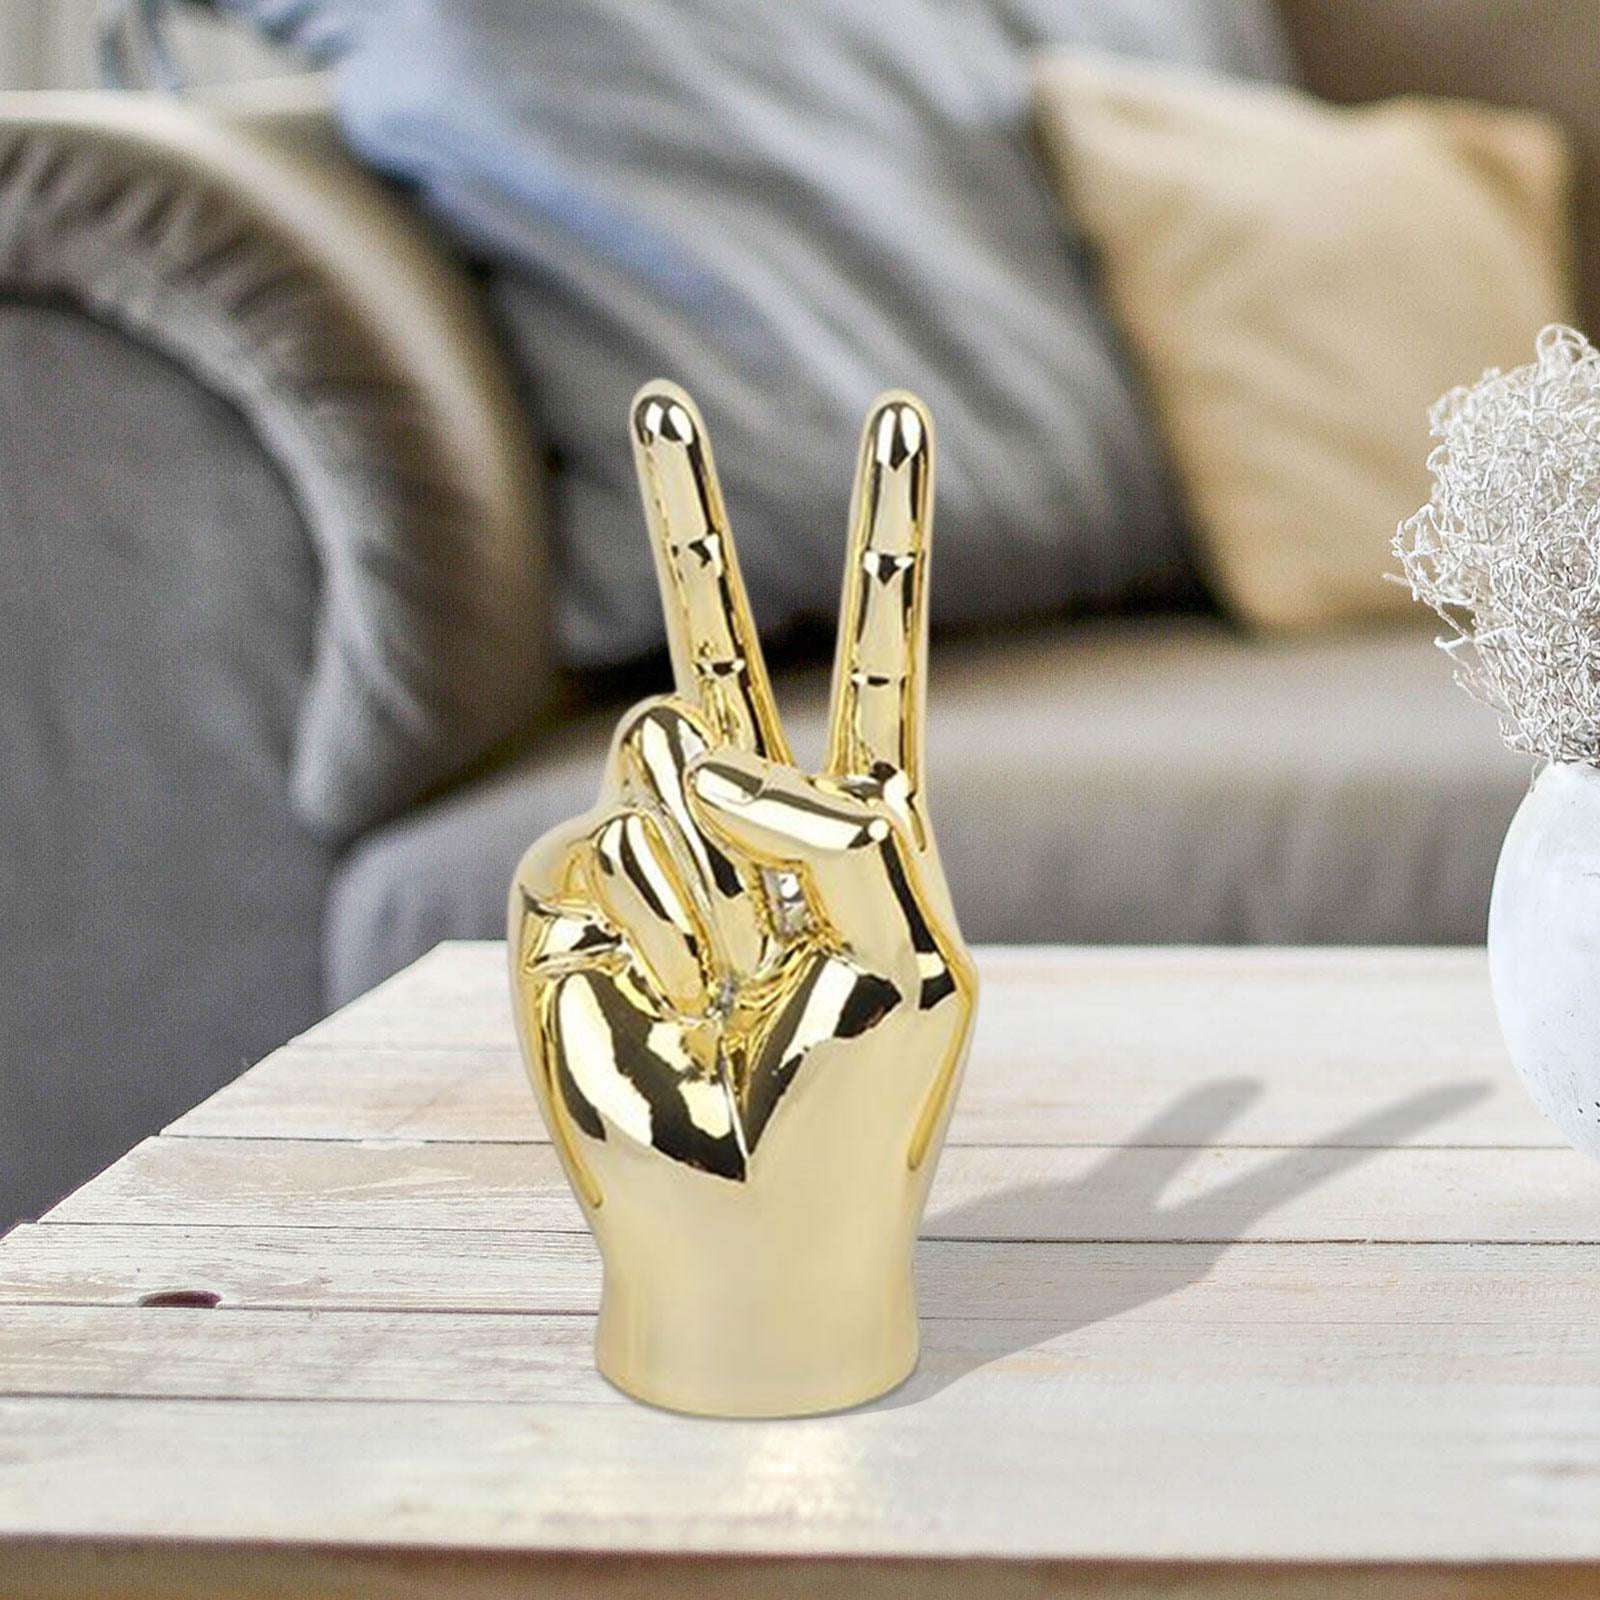 Hand Statue Resin Hand Gesture Sculptures Peace OK Thumbs Up Hand Sculpture  Home Decor for Cabinet Shelf Display Decoration - AliExpress